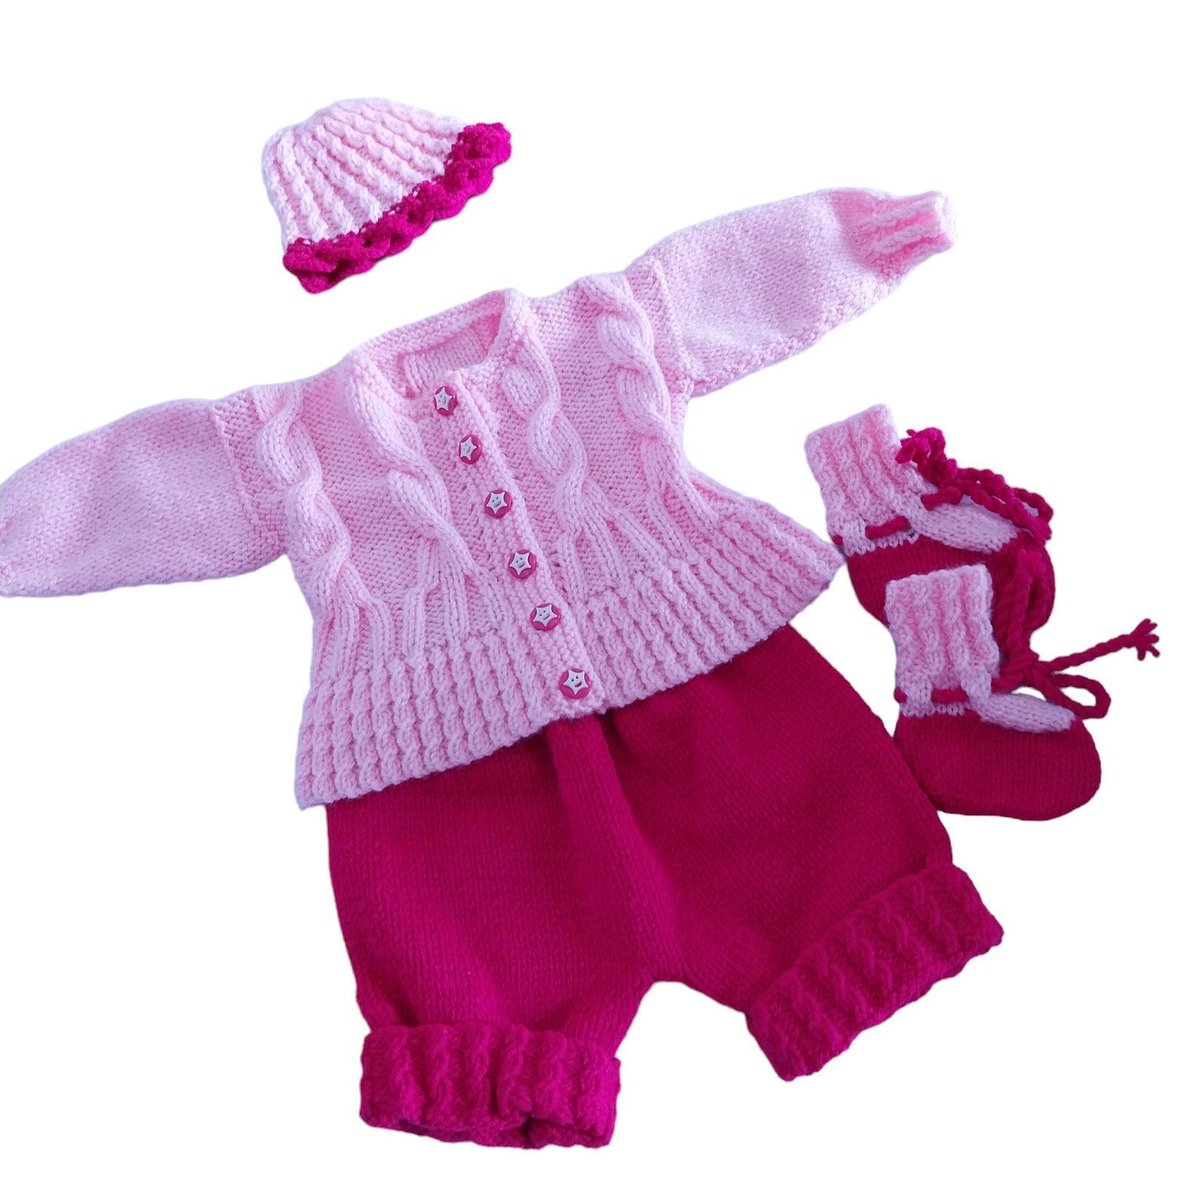 Dress up your little one in this precious hand-knitted baby pink set! Ideal for 0-3 months. Shop now on #Etsy: knittingtopia.etsy.com/listing/169362… #knittingtopia #BabyFashion #EtsyFinds #MHHSBD #craftbizparty #uksmallbiz